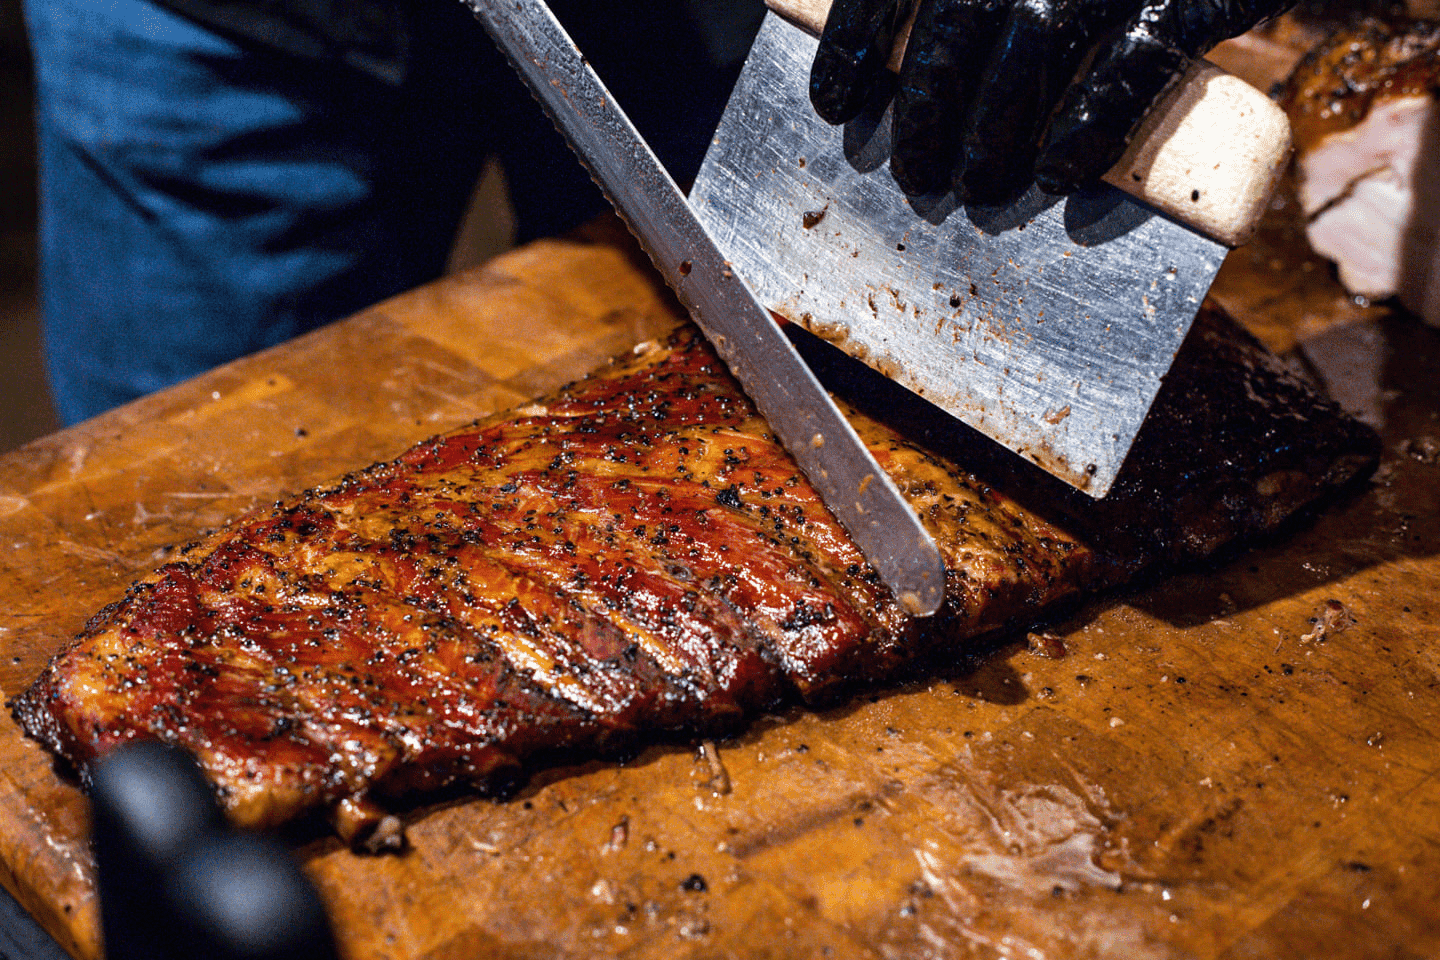 New Episode This Weekend: Short Ribs Three Days in the Making, Out-of-This-World ’Cue, and Grilling Tips from Black’s Pro Pitmaster